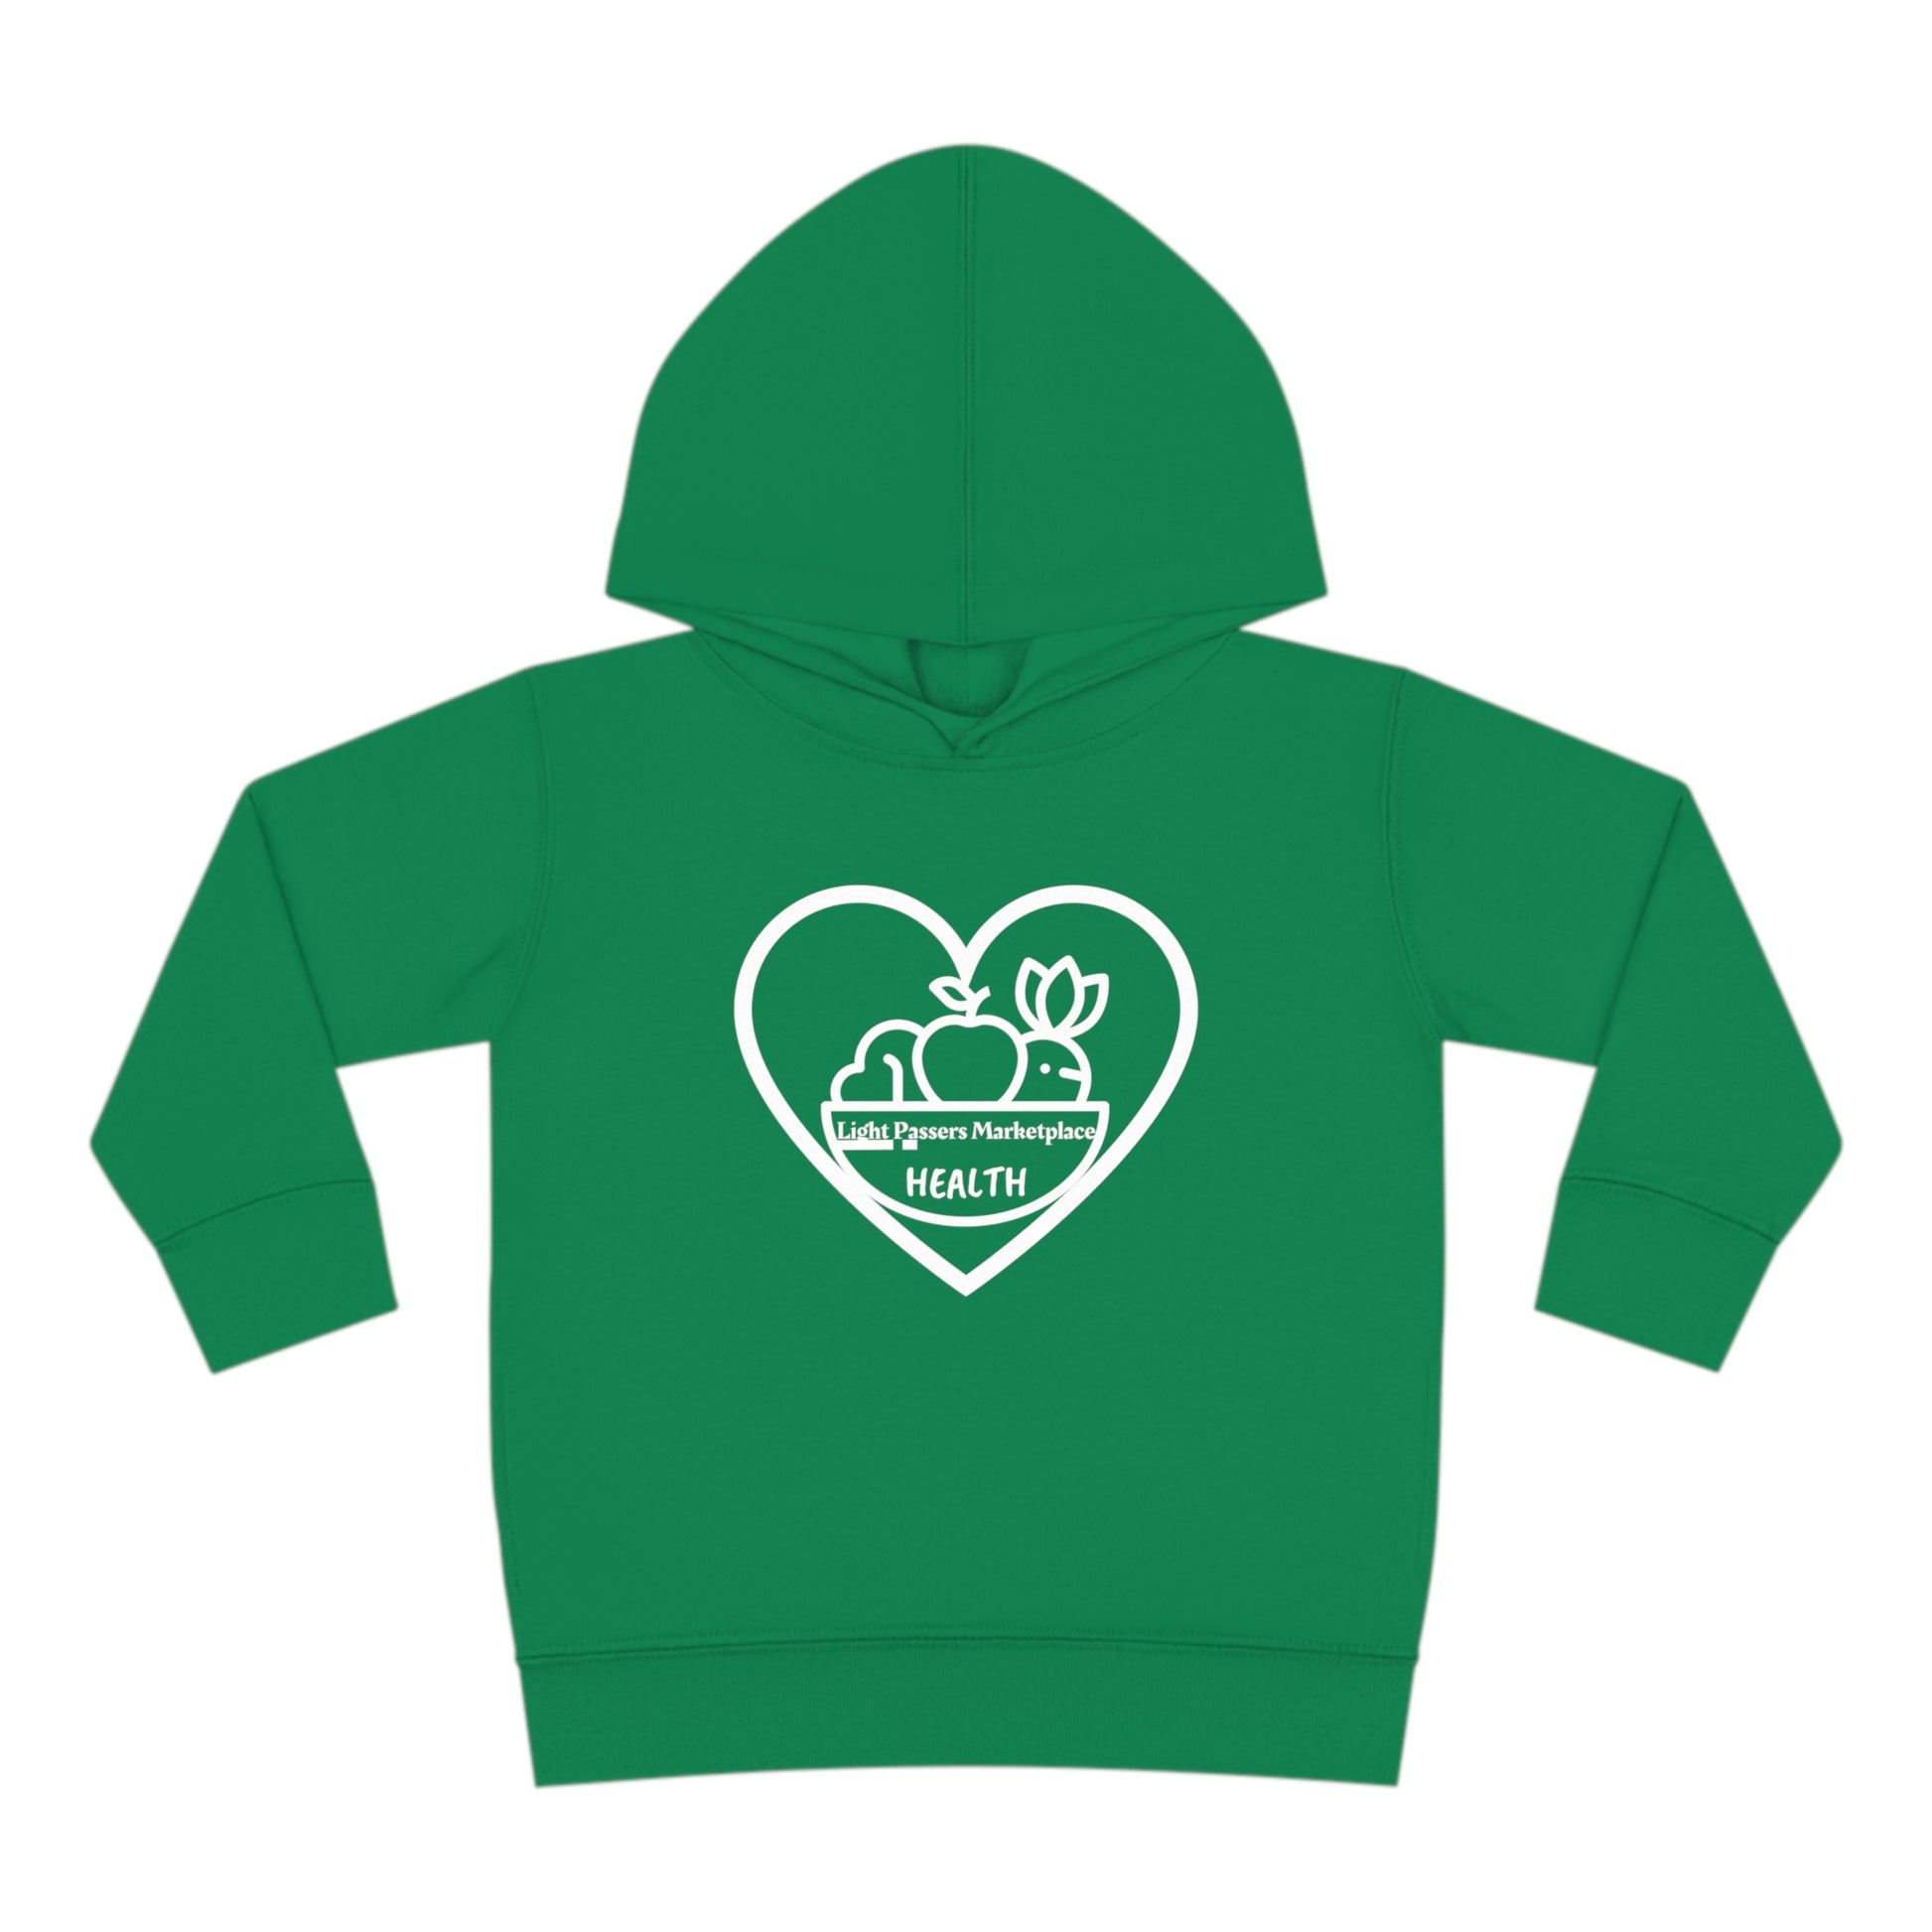 A Rabbit Skins Fruit Basket Toddler Hoodie in green, featuring a heart, apples, and logo design. Jersey-lined hood, side-seam pockets, and durable stitching for lasting coziness. Made of 60% cotton, 40% polyester.